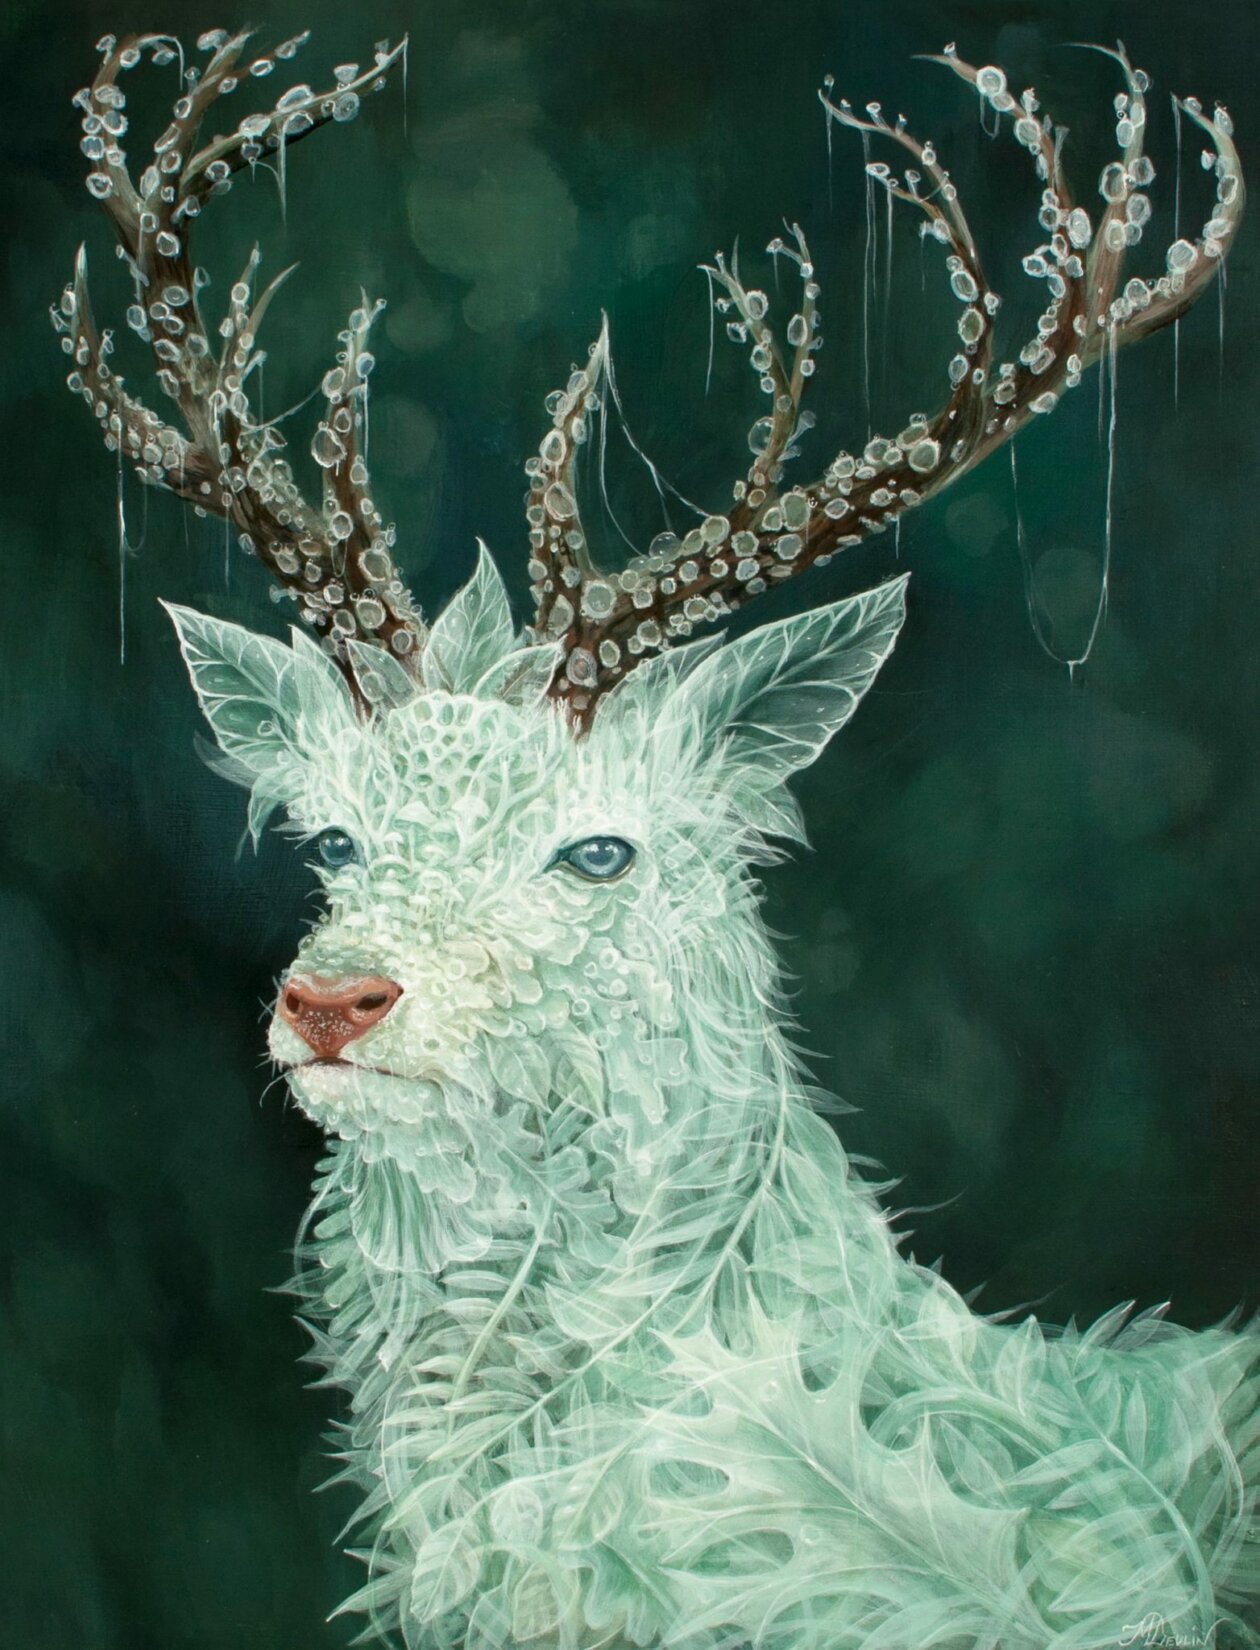 Surrealistic Portrait Paintings Of Animals Composed Of Translucent Botanics By Molly Devlin (4)